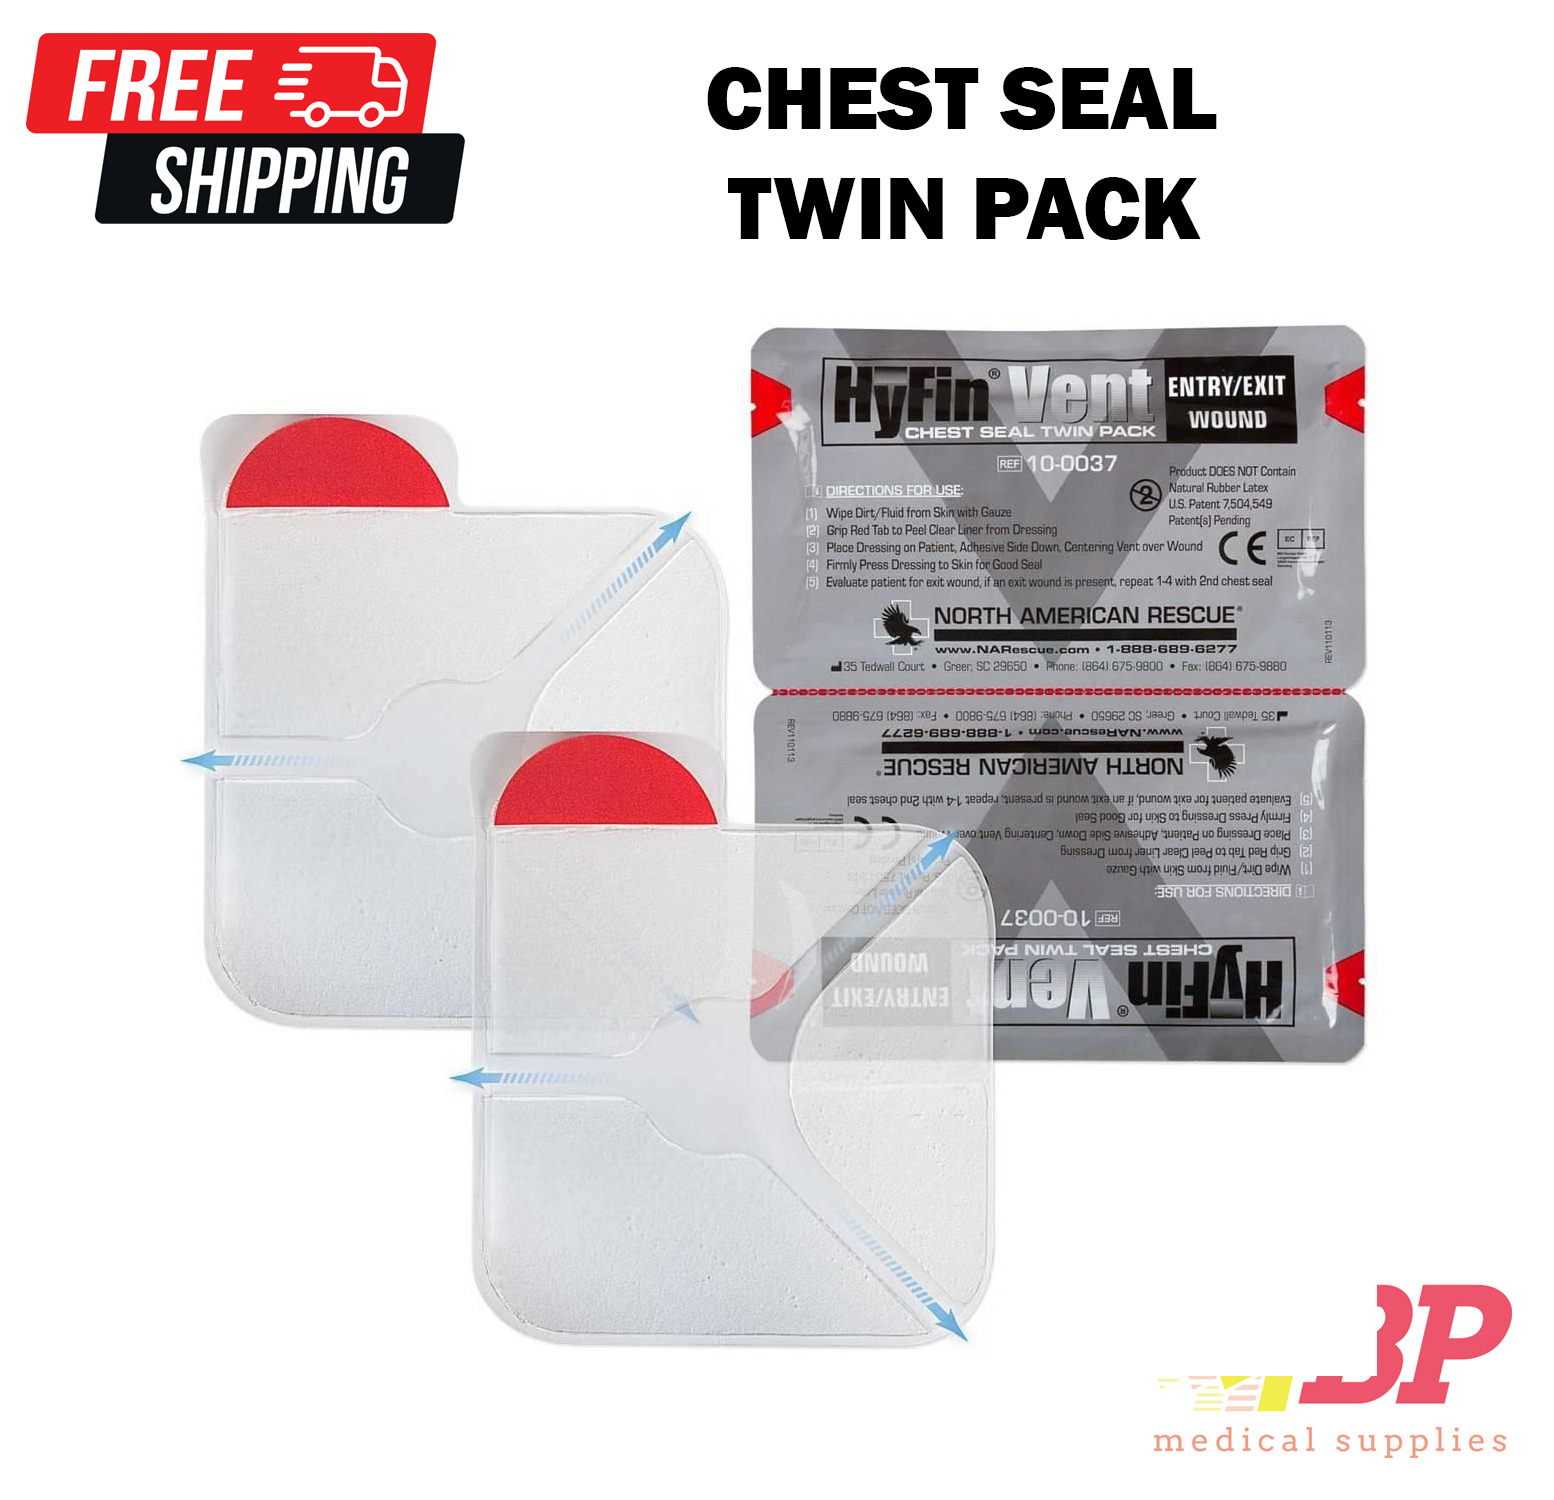 Hyfin Vent 10-0037 Chest Seal Twin Pack for Wounds 6\